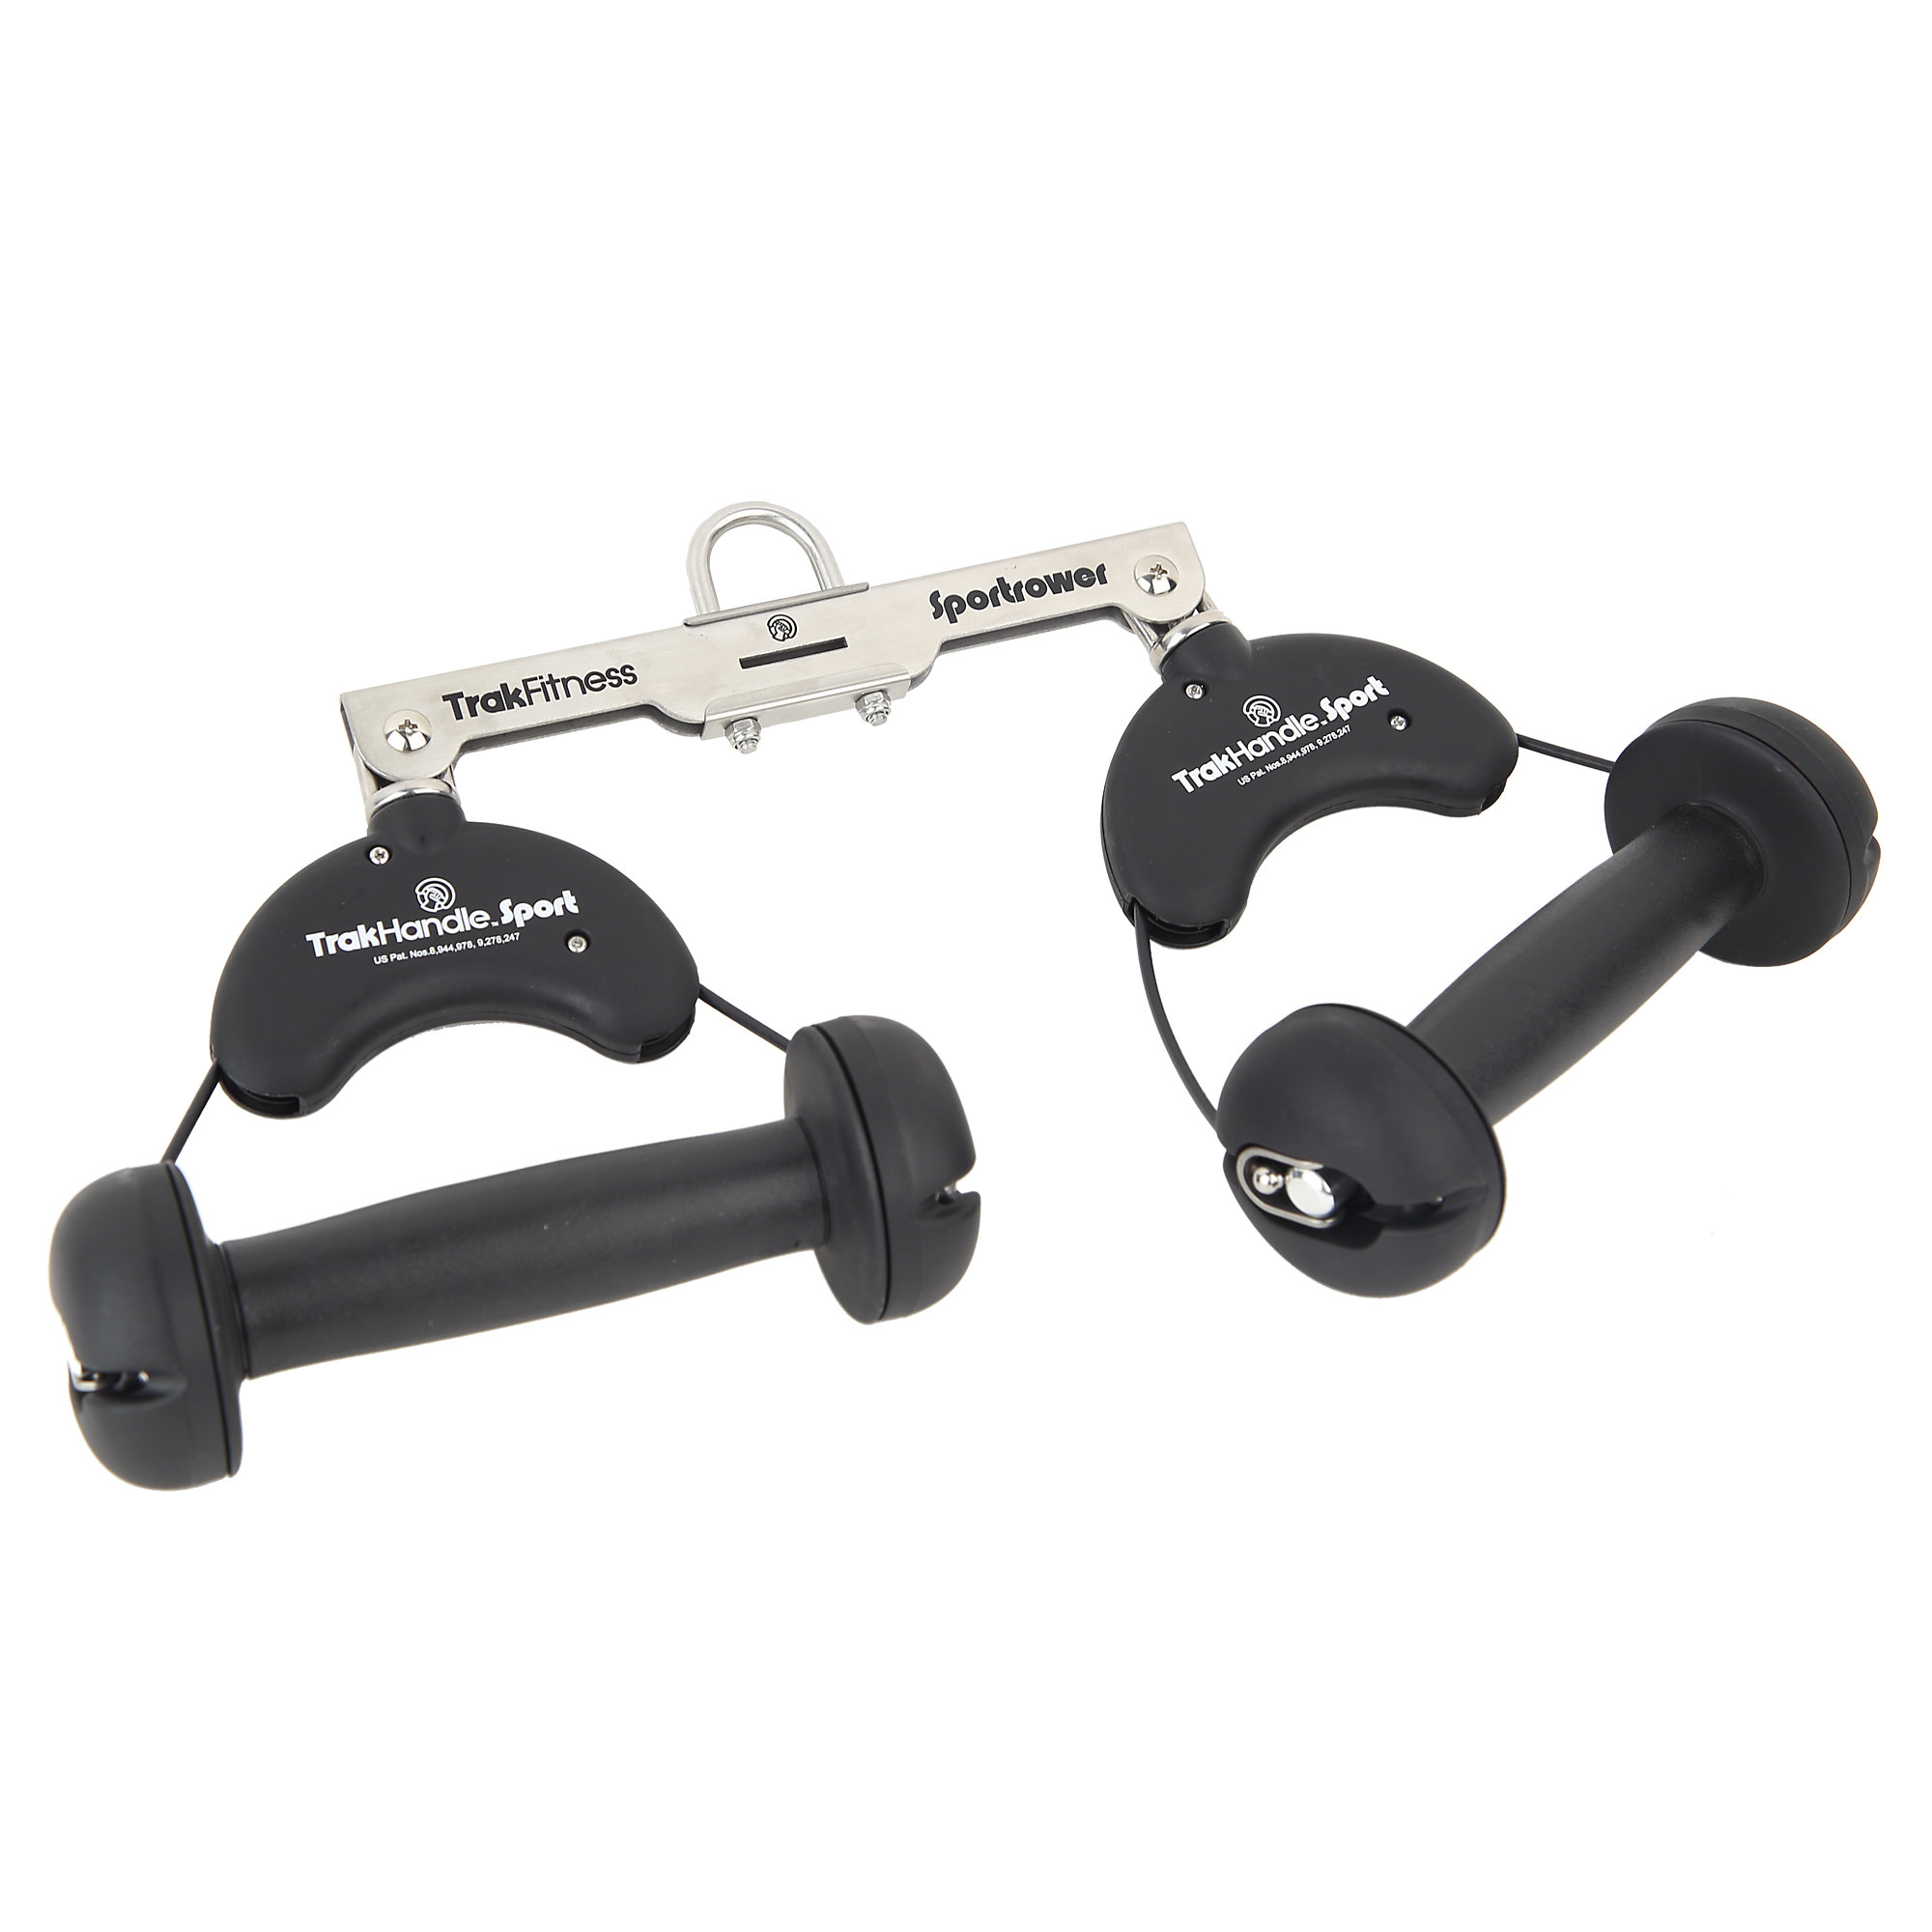 TrakHandle Sportrower Handle for Indoor Rowers